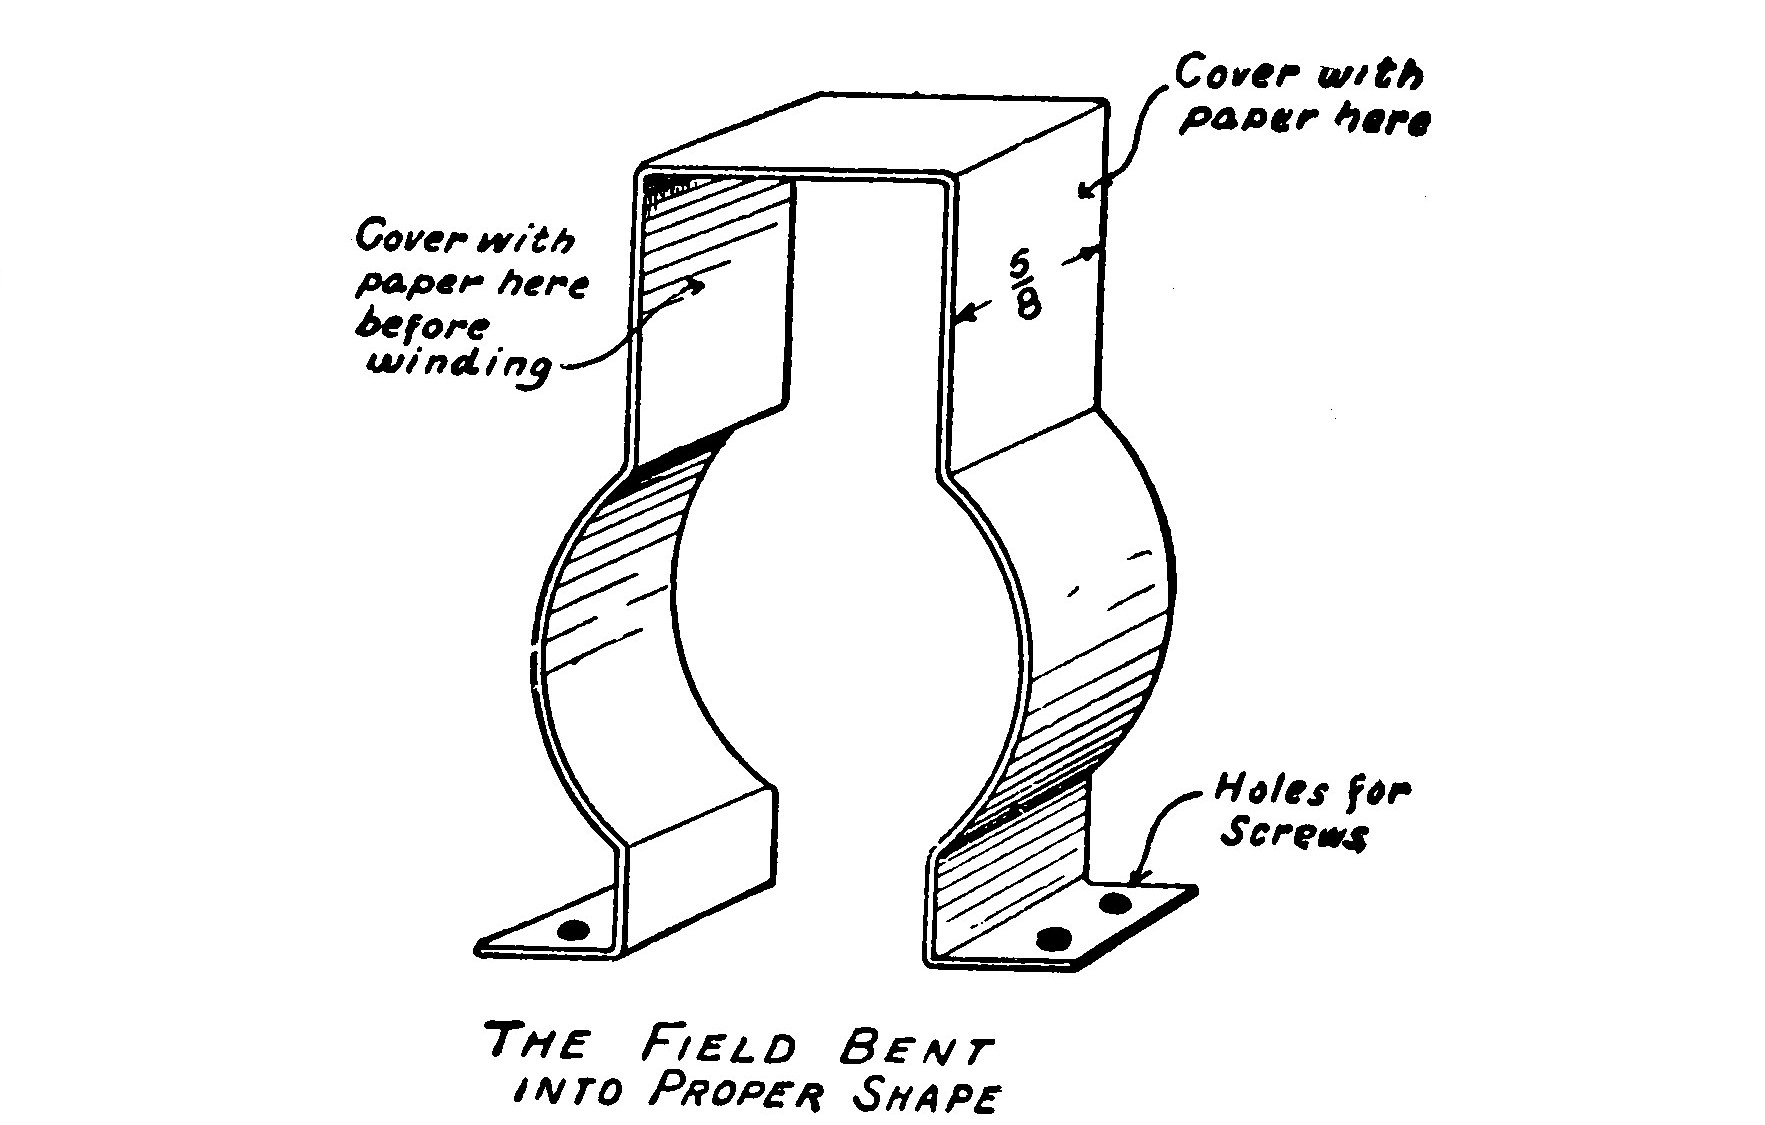 FIG. 11.—The completed Field Frame, ready for winding.